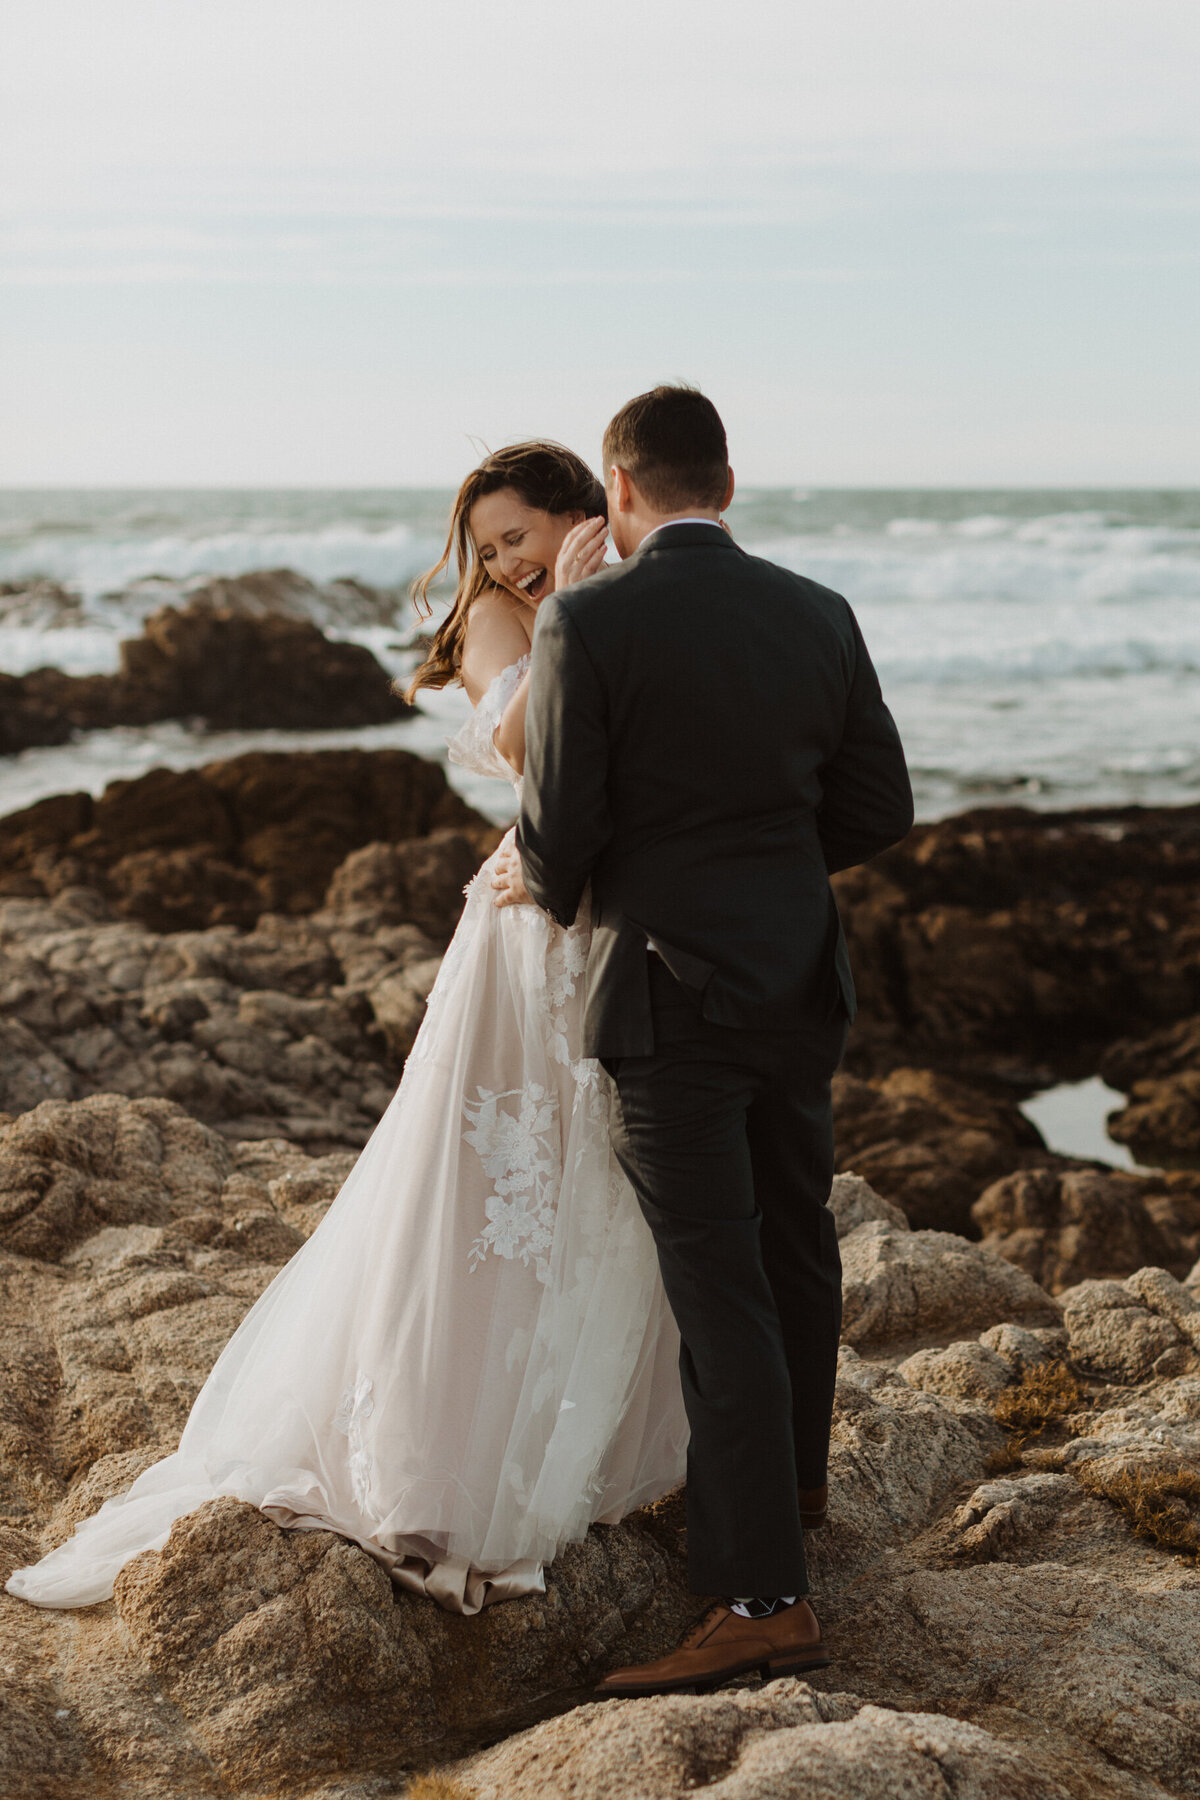 Bride laughing and facing groom while standing on rocky ocean coast